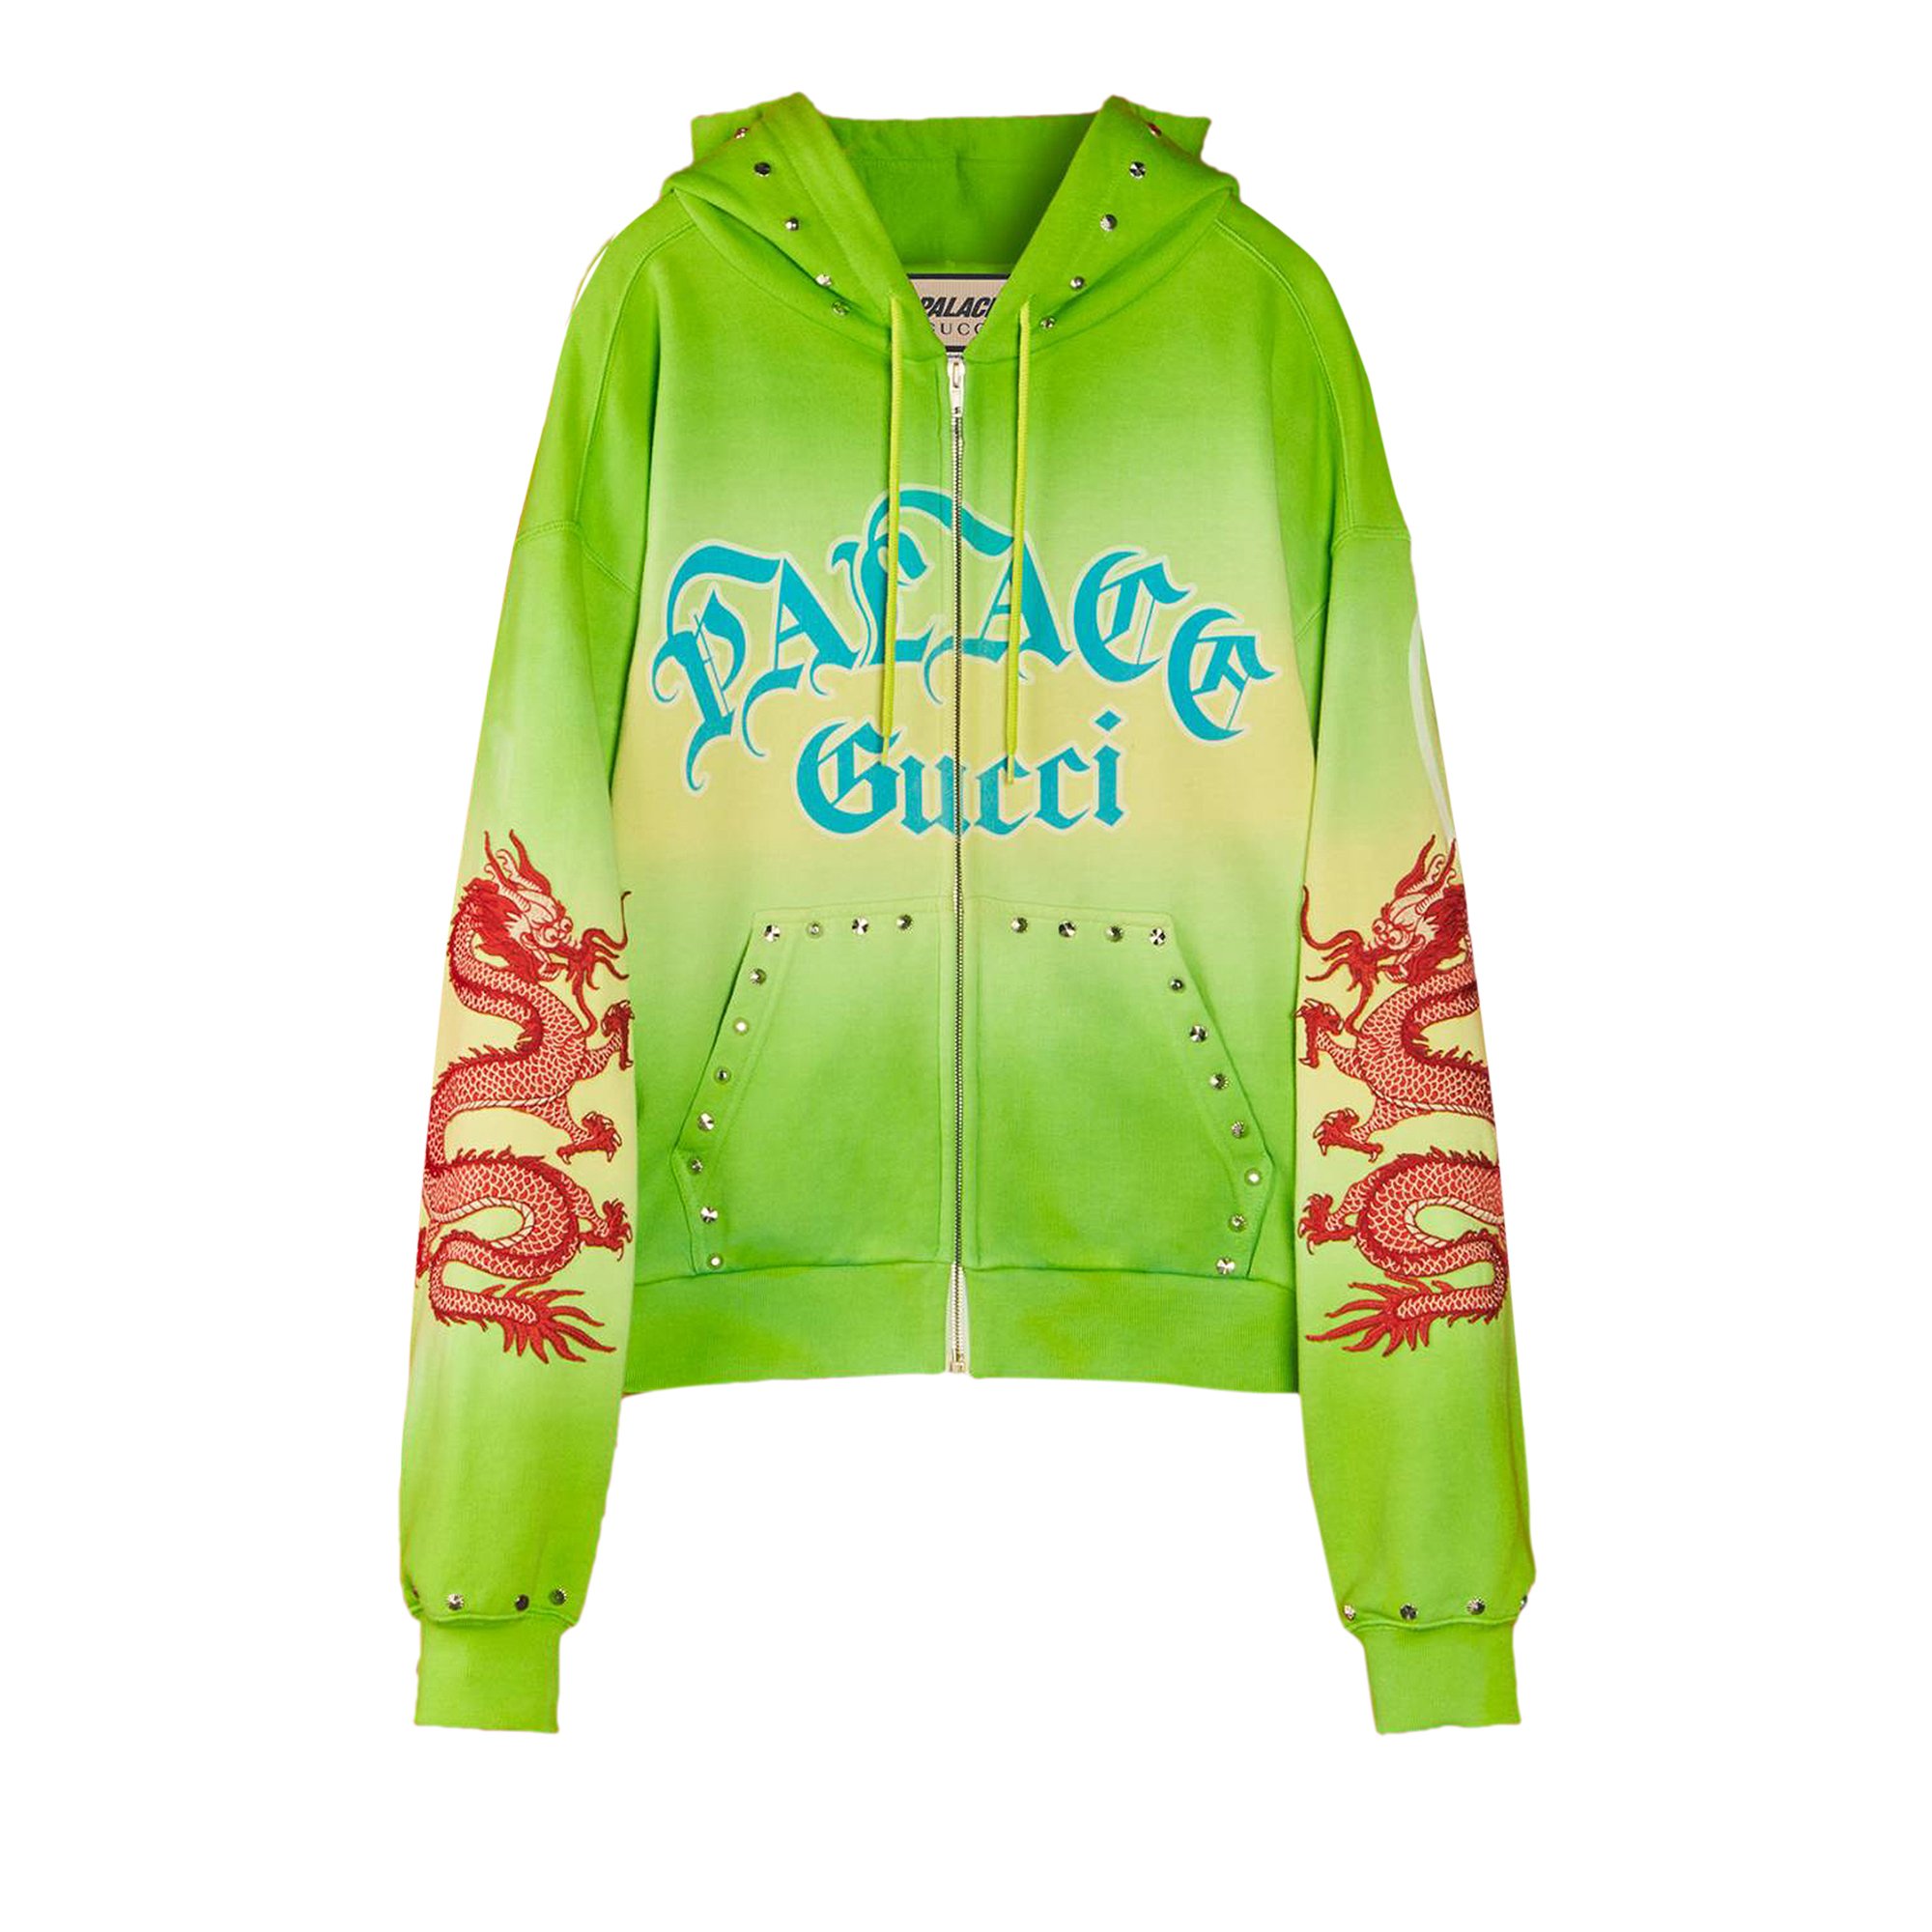 Buy Gucci x Palace Studded And Embroidered Tie-Dye Sweatshirt